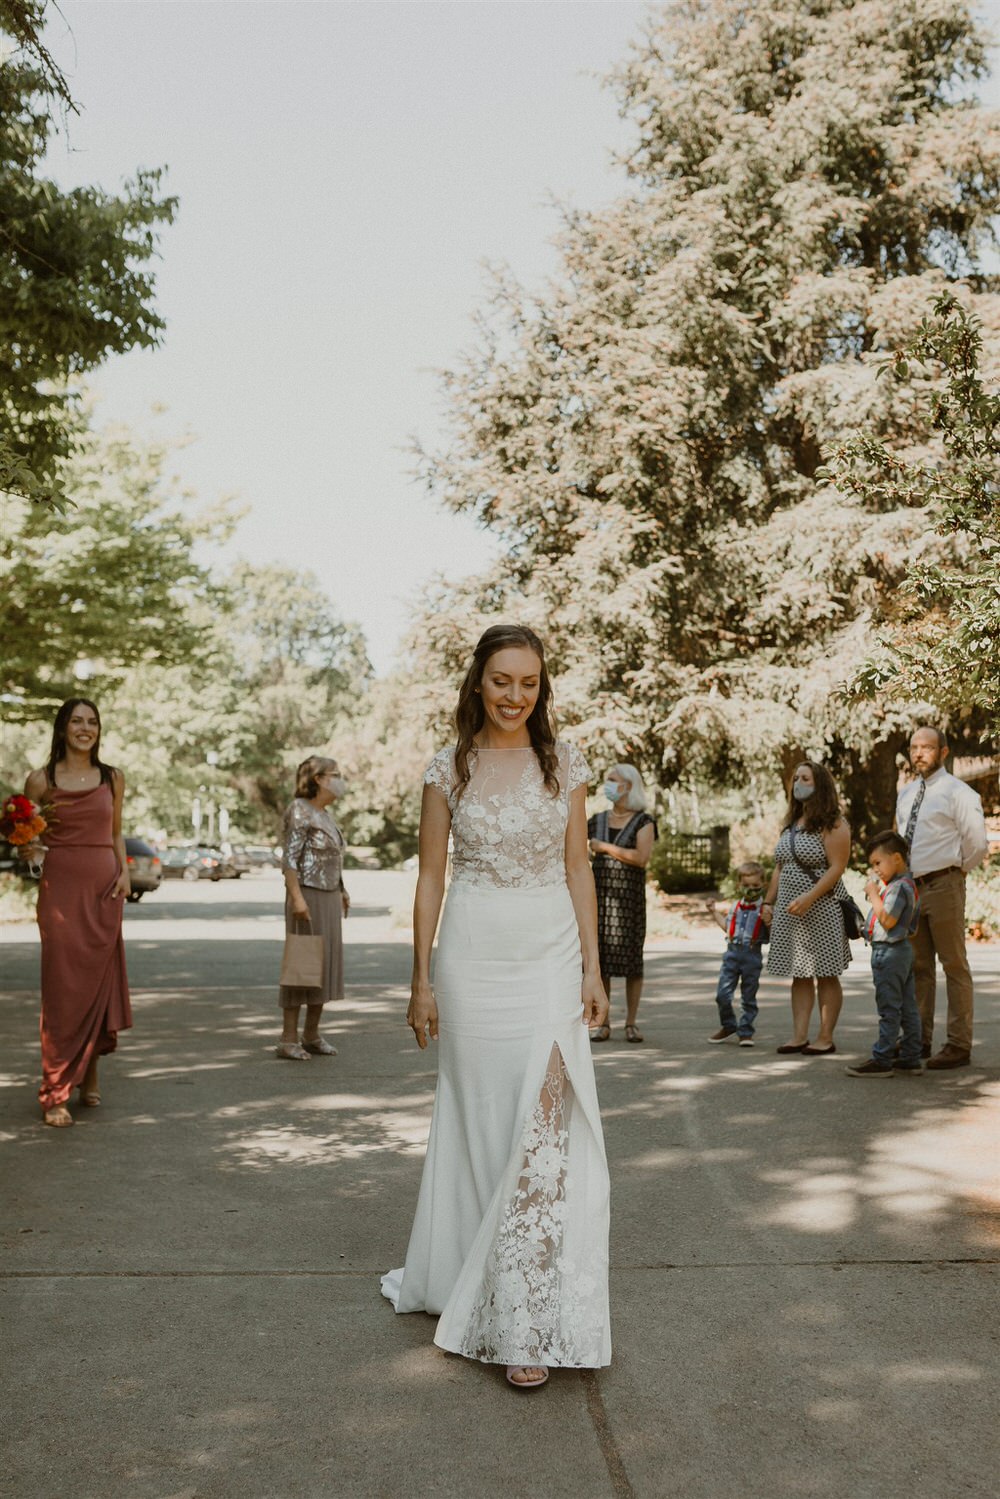 Seattle bride wearing a modern illusion neckline wedding dress with floral appliqué and high slit. 